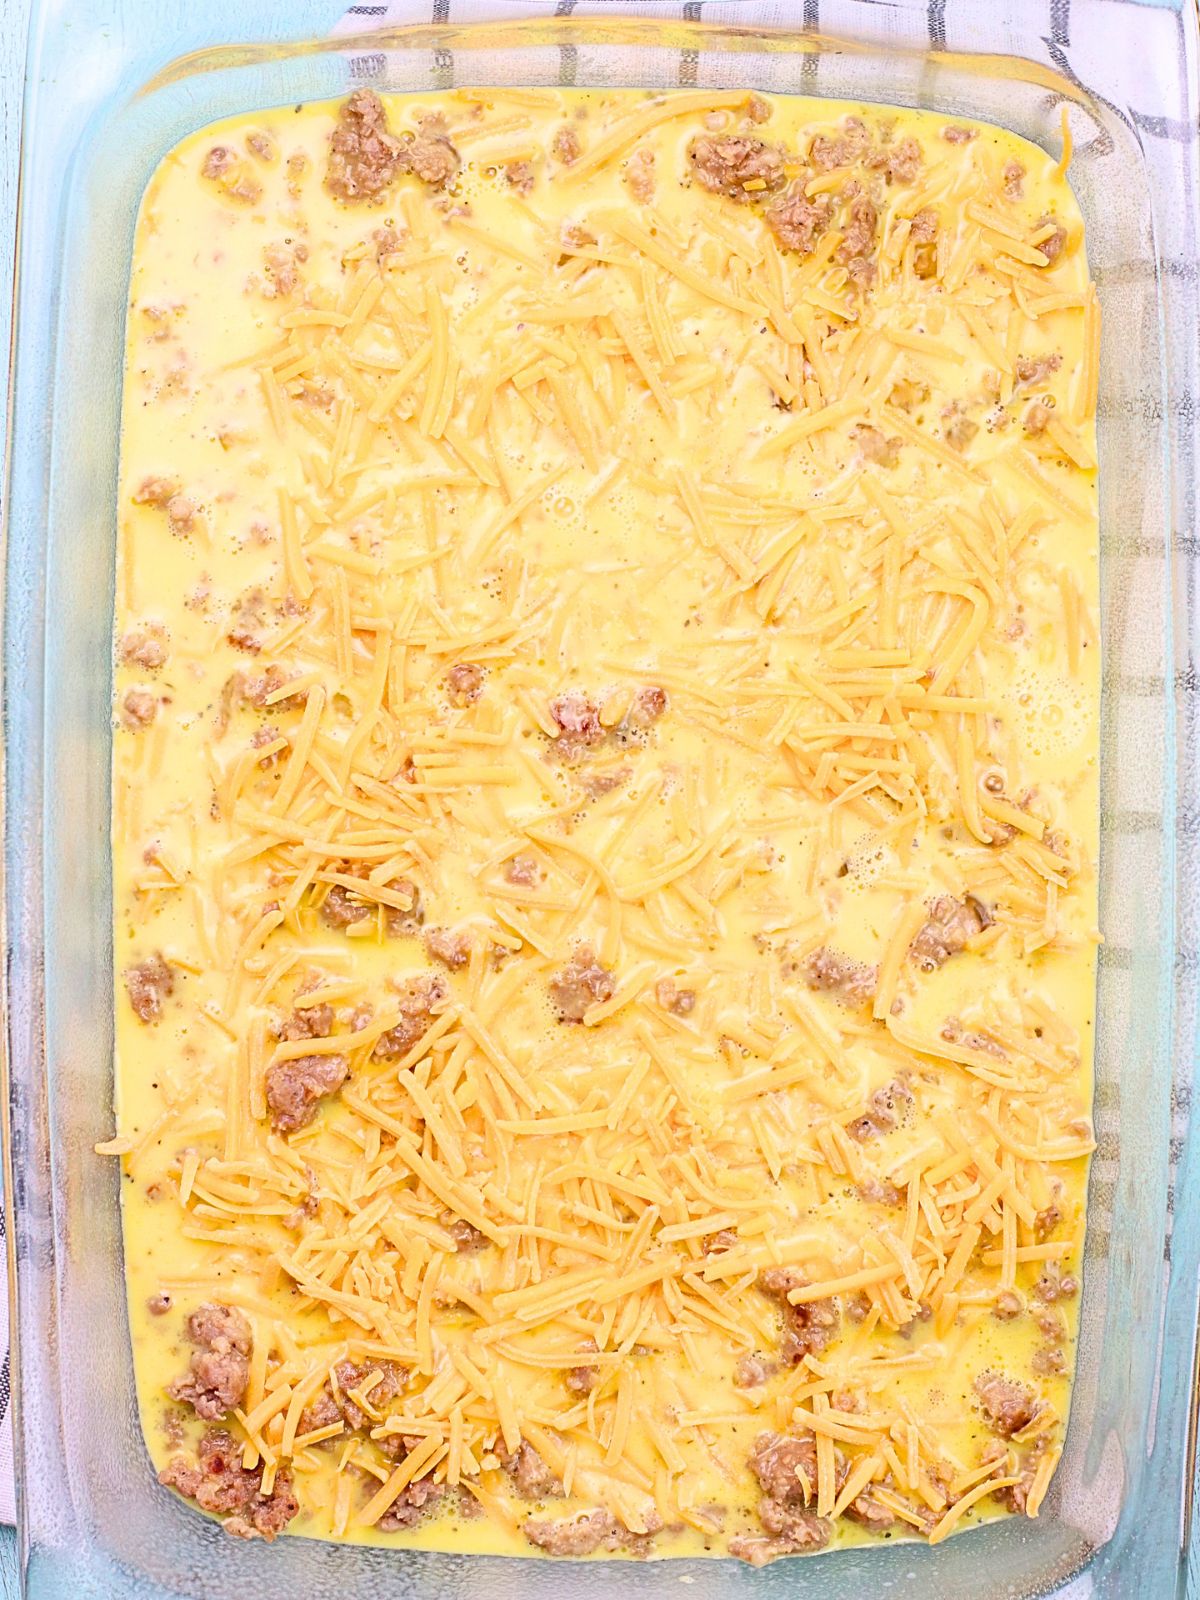 eggs and sausage and cheese in casserole dish.